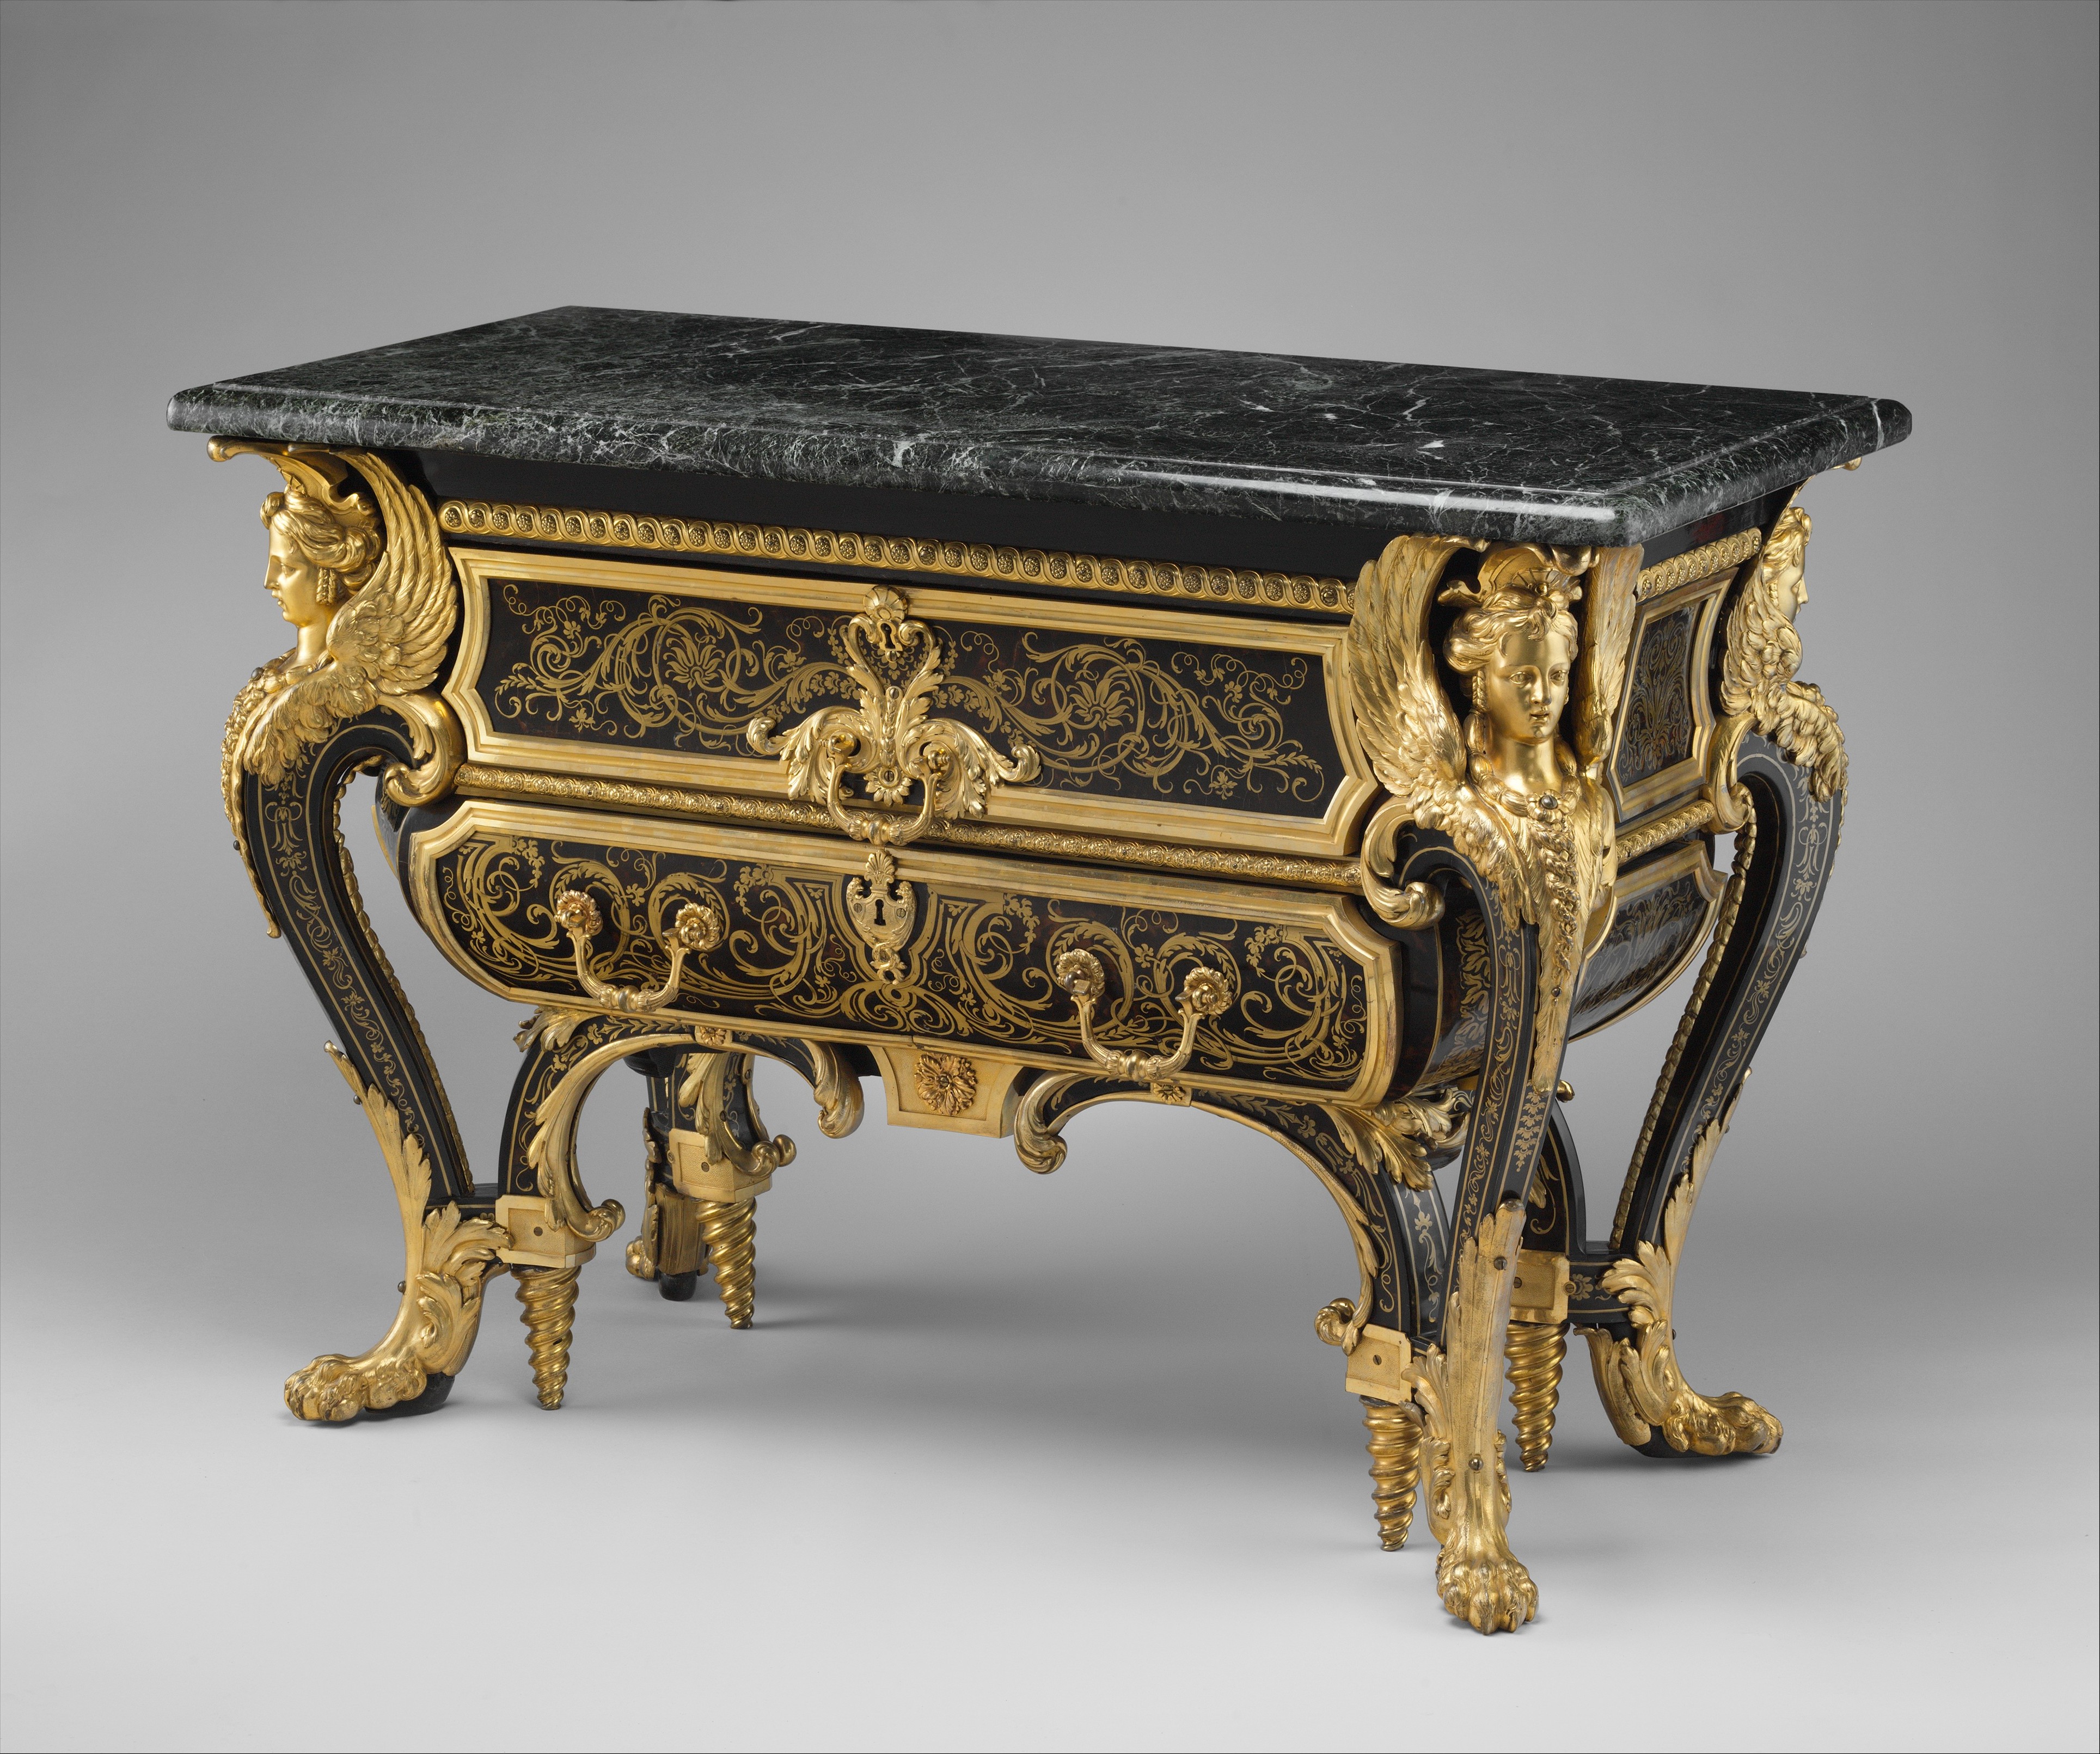 Kommode Mazarine by André-Charles Boulle - 1708 - 87.6 × 128.3 × 62.9 cm Metropolitan Museum of Art